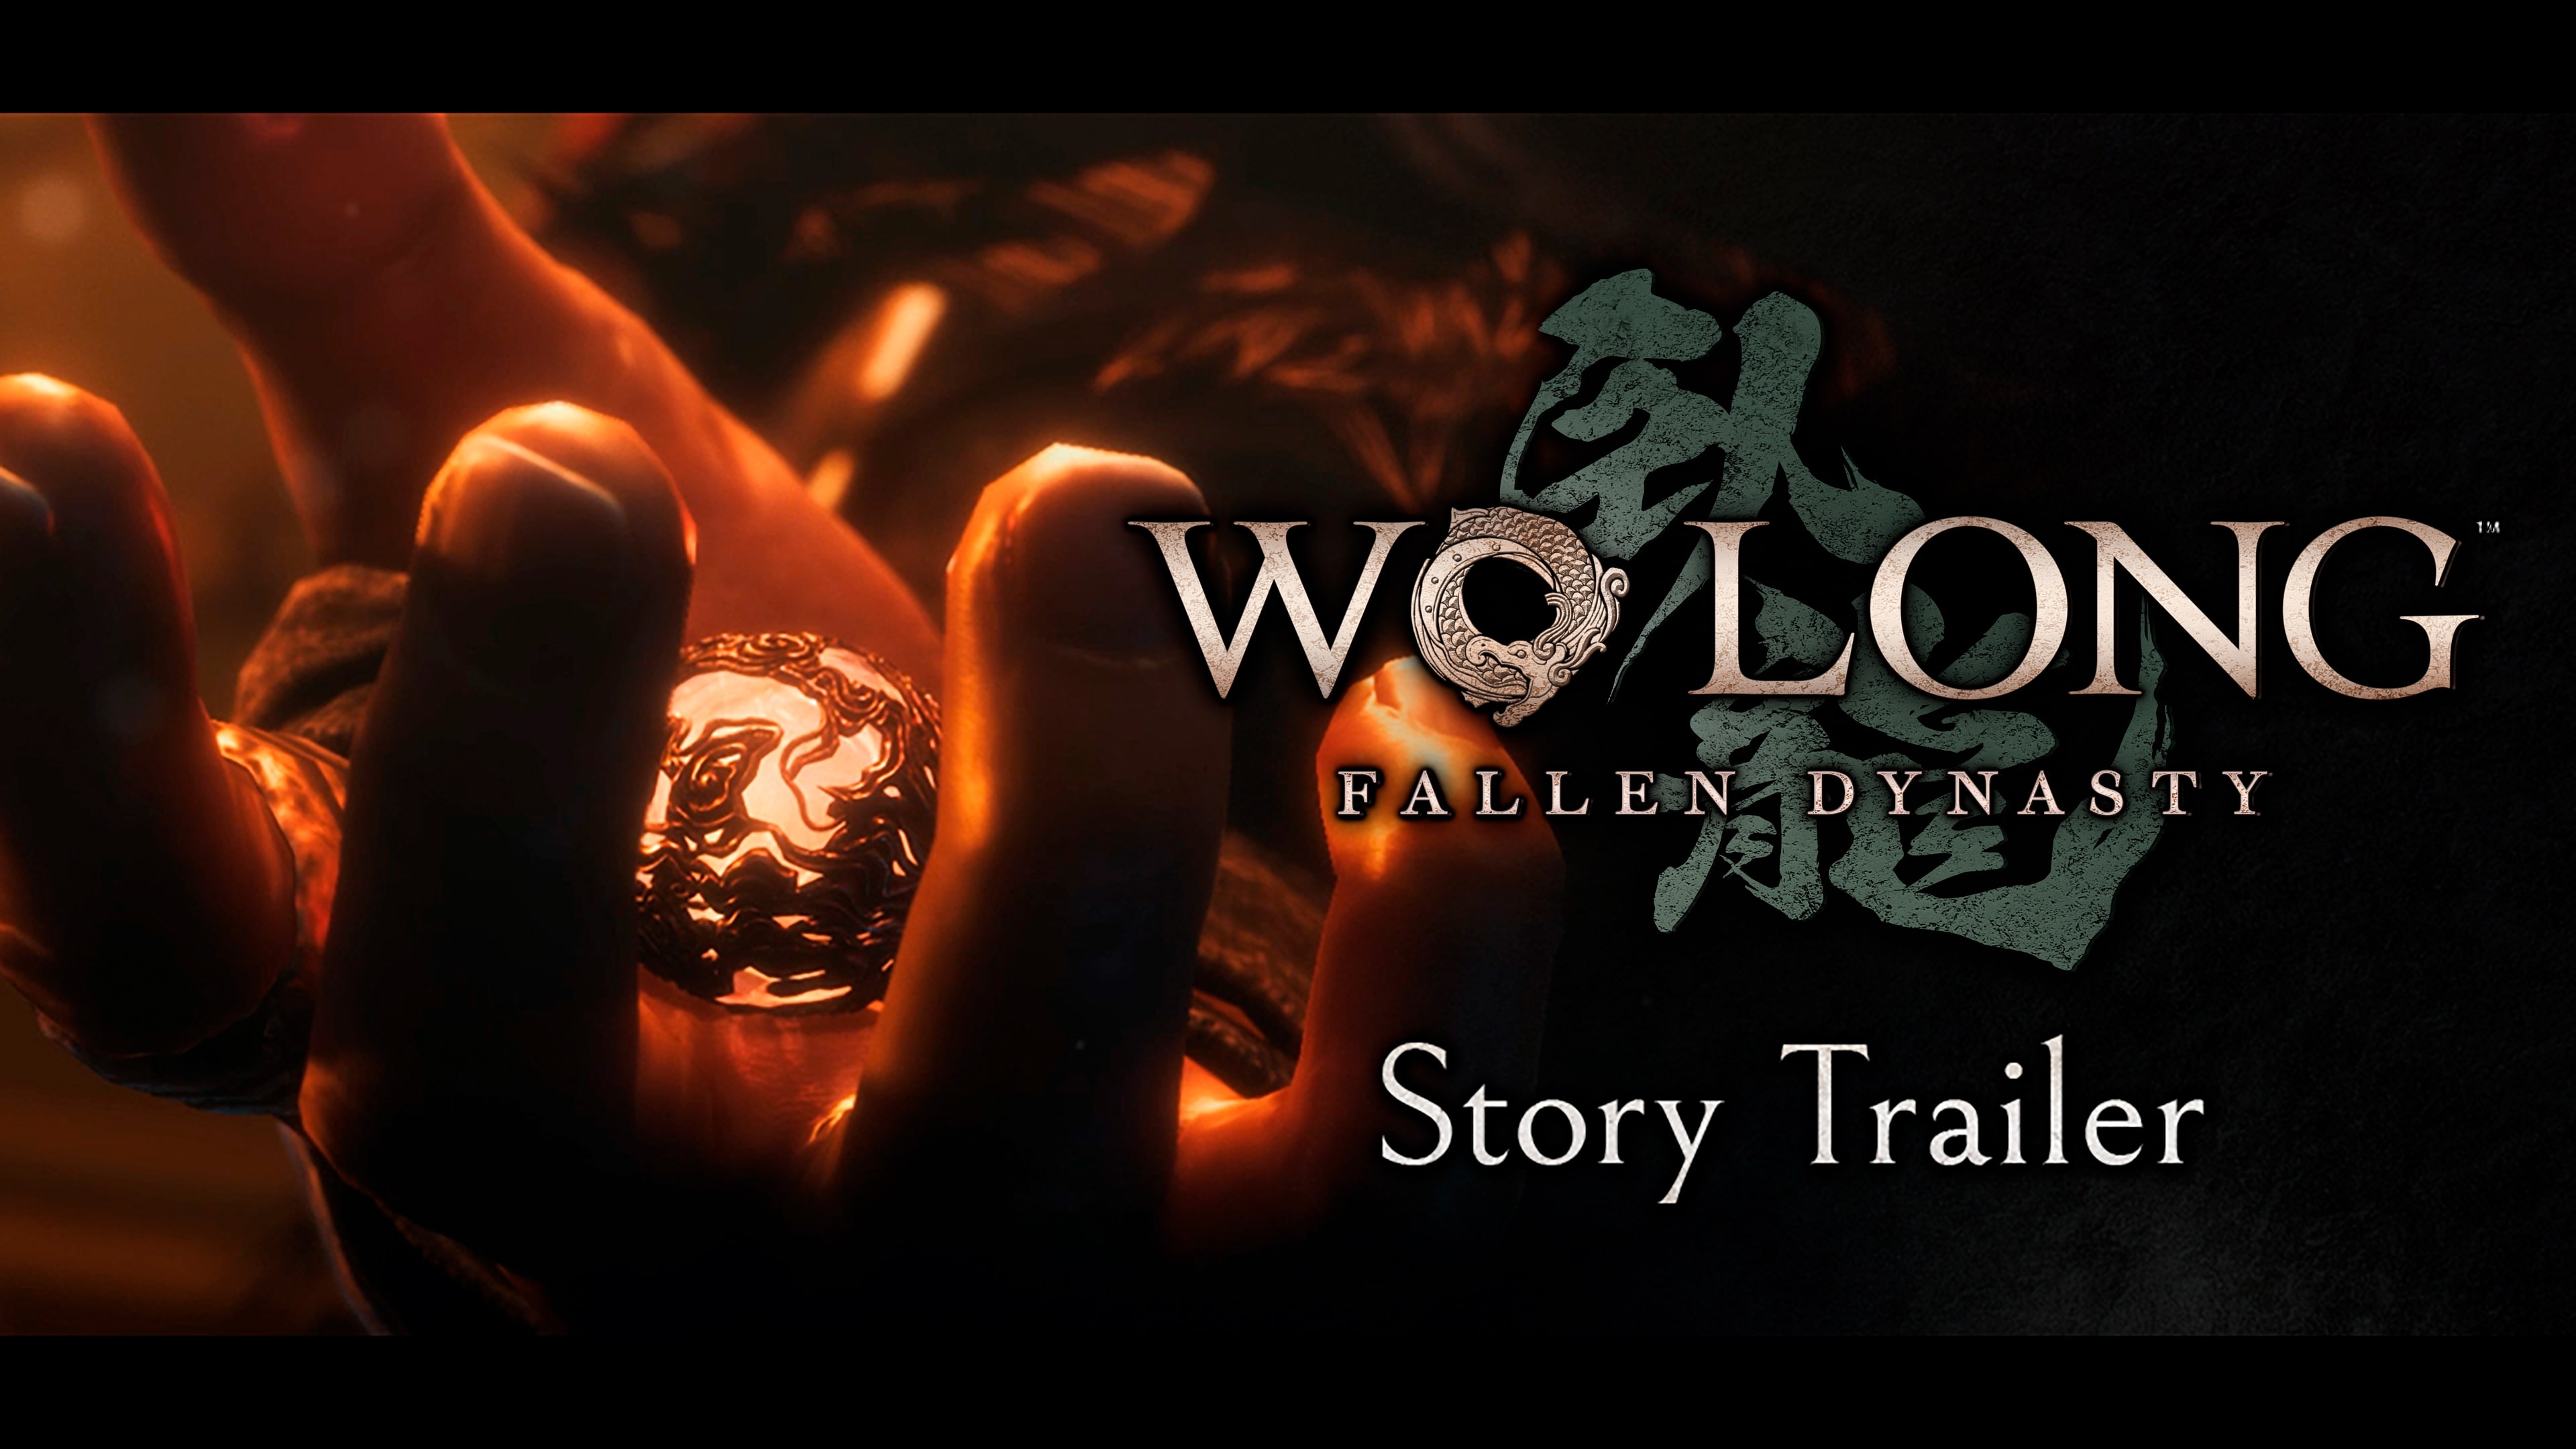 Wo Long: Fallen Dynasty Complete Edition (PS4 & PS5) on PS4 PS5 — price  history, screenshots, discounts • USA